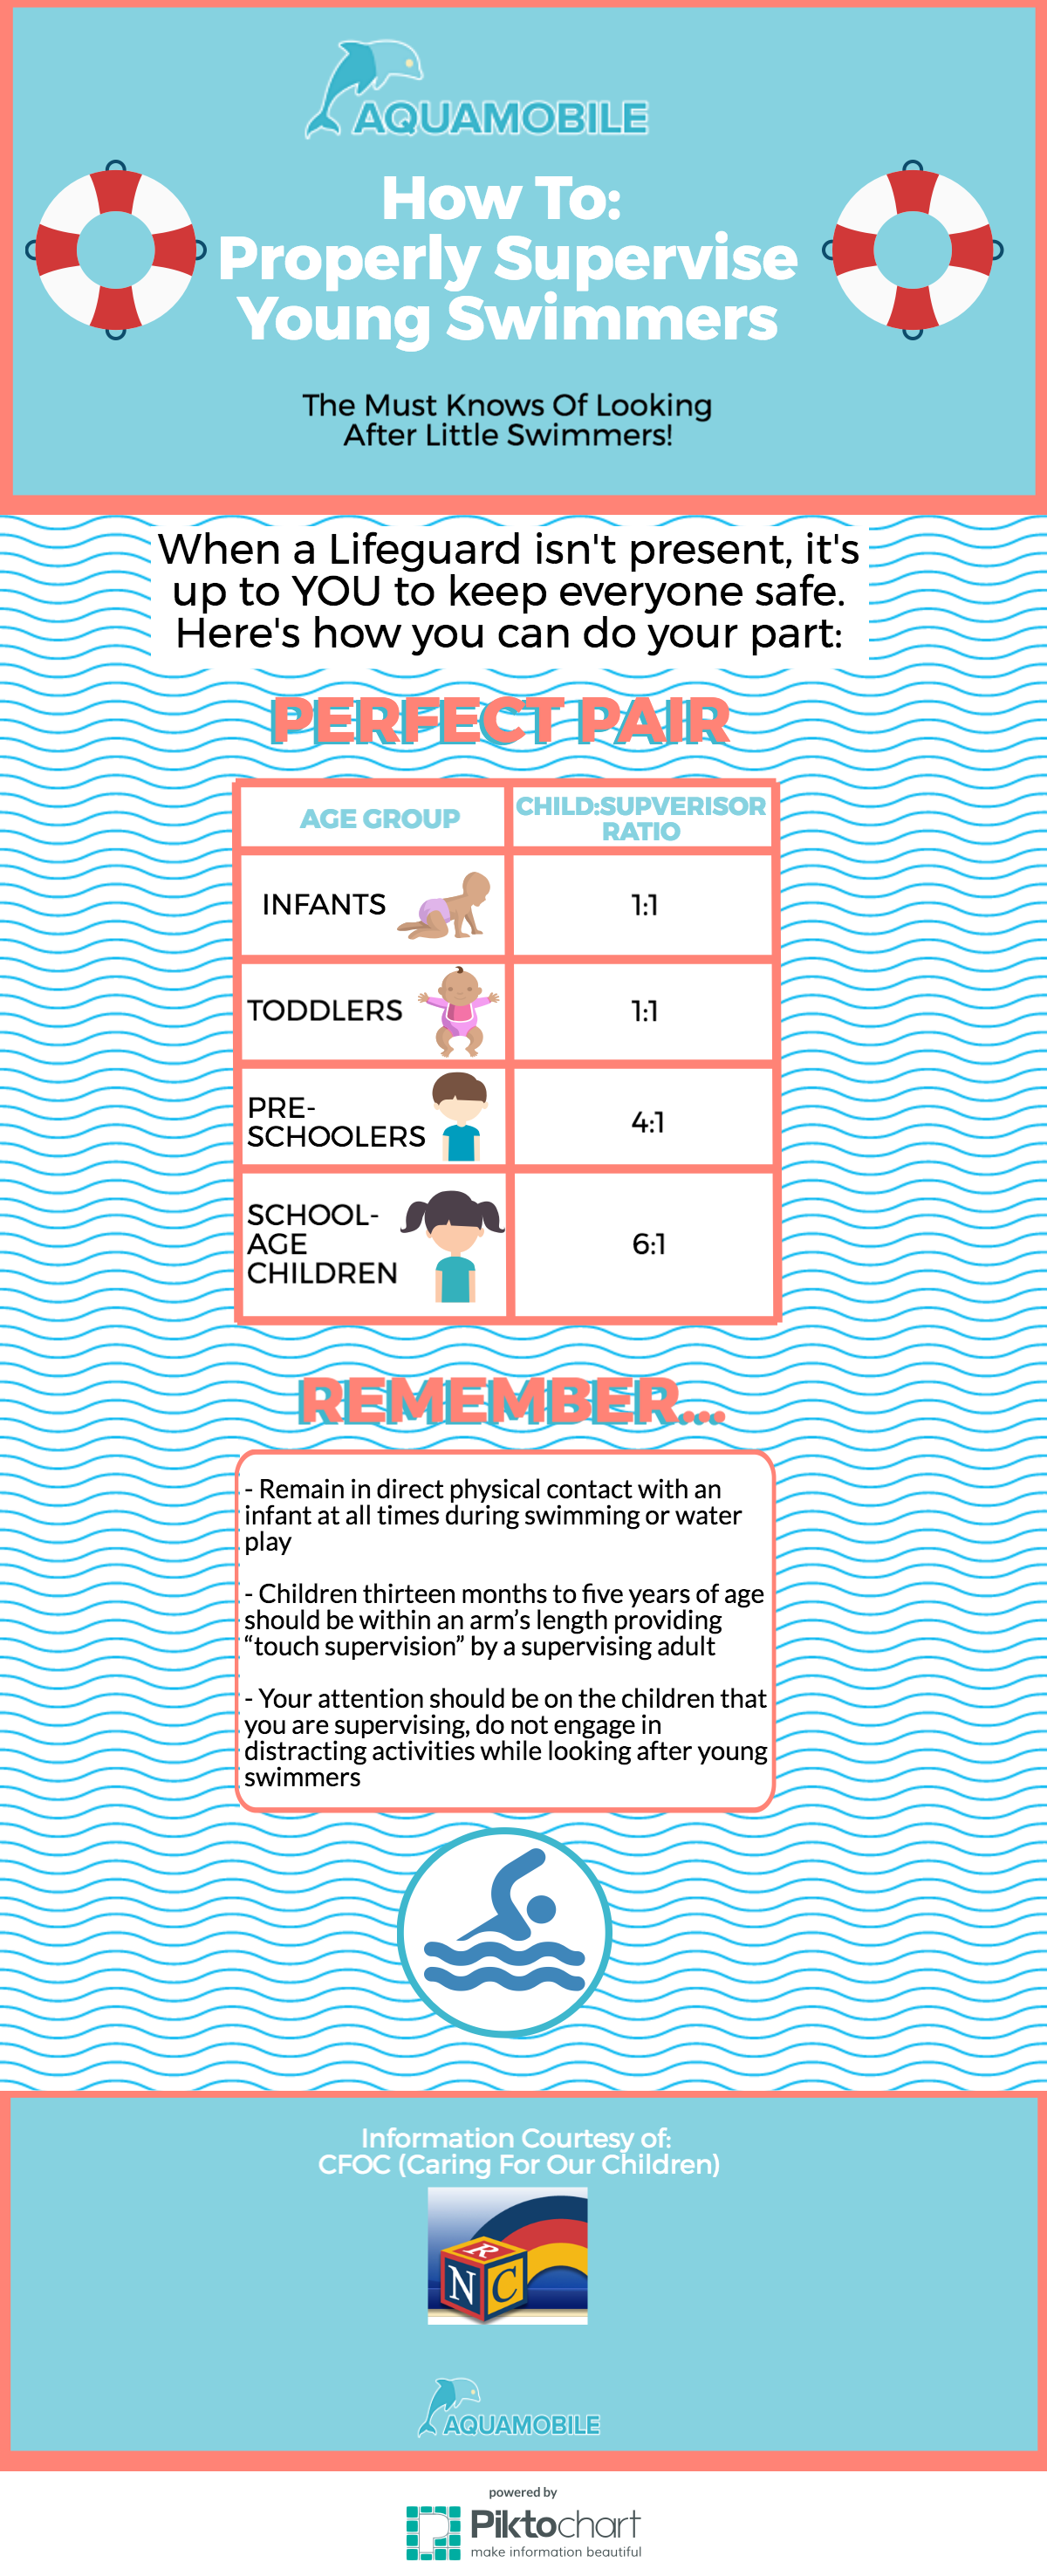 AquaMobile Swim gives you tips on how to properly supervise children while they swim